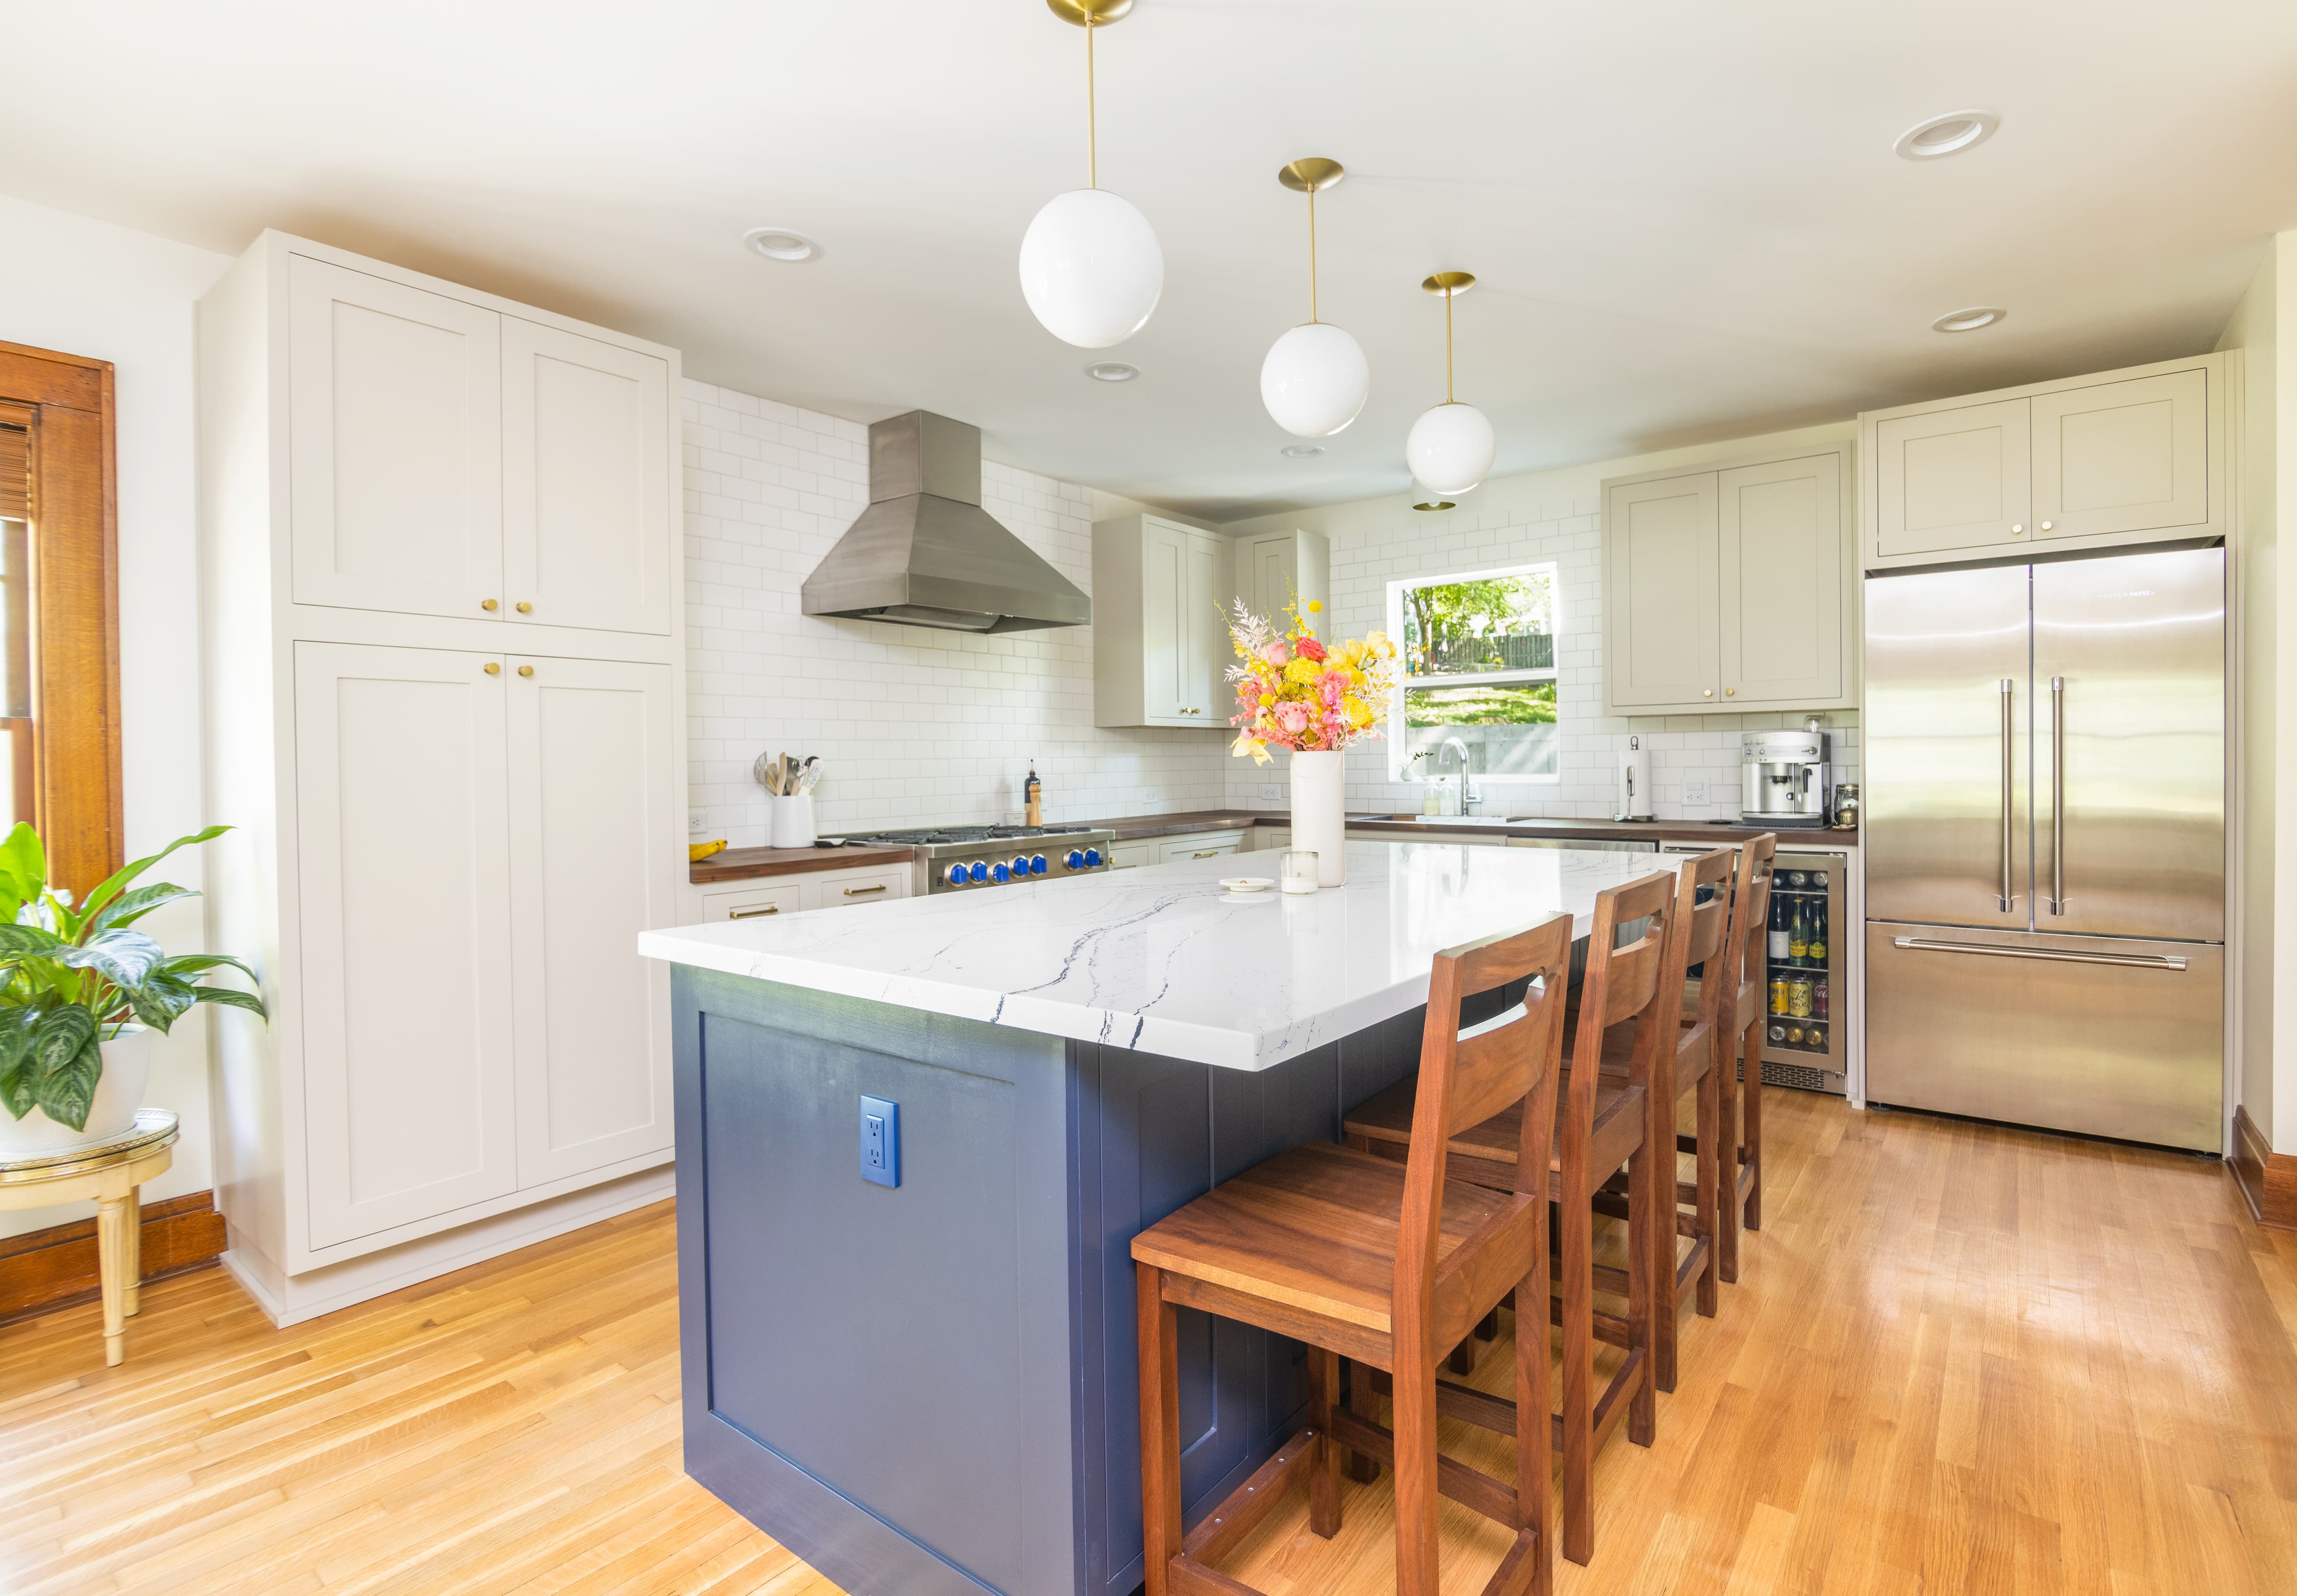 Abby & Colby | Eclectic Modern Kitchen & Bathroom Renovation in Des Moines